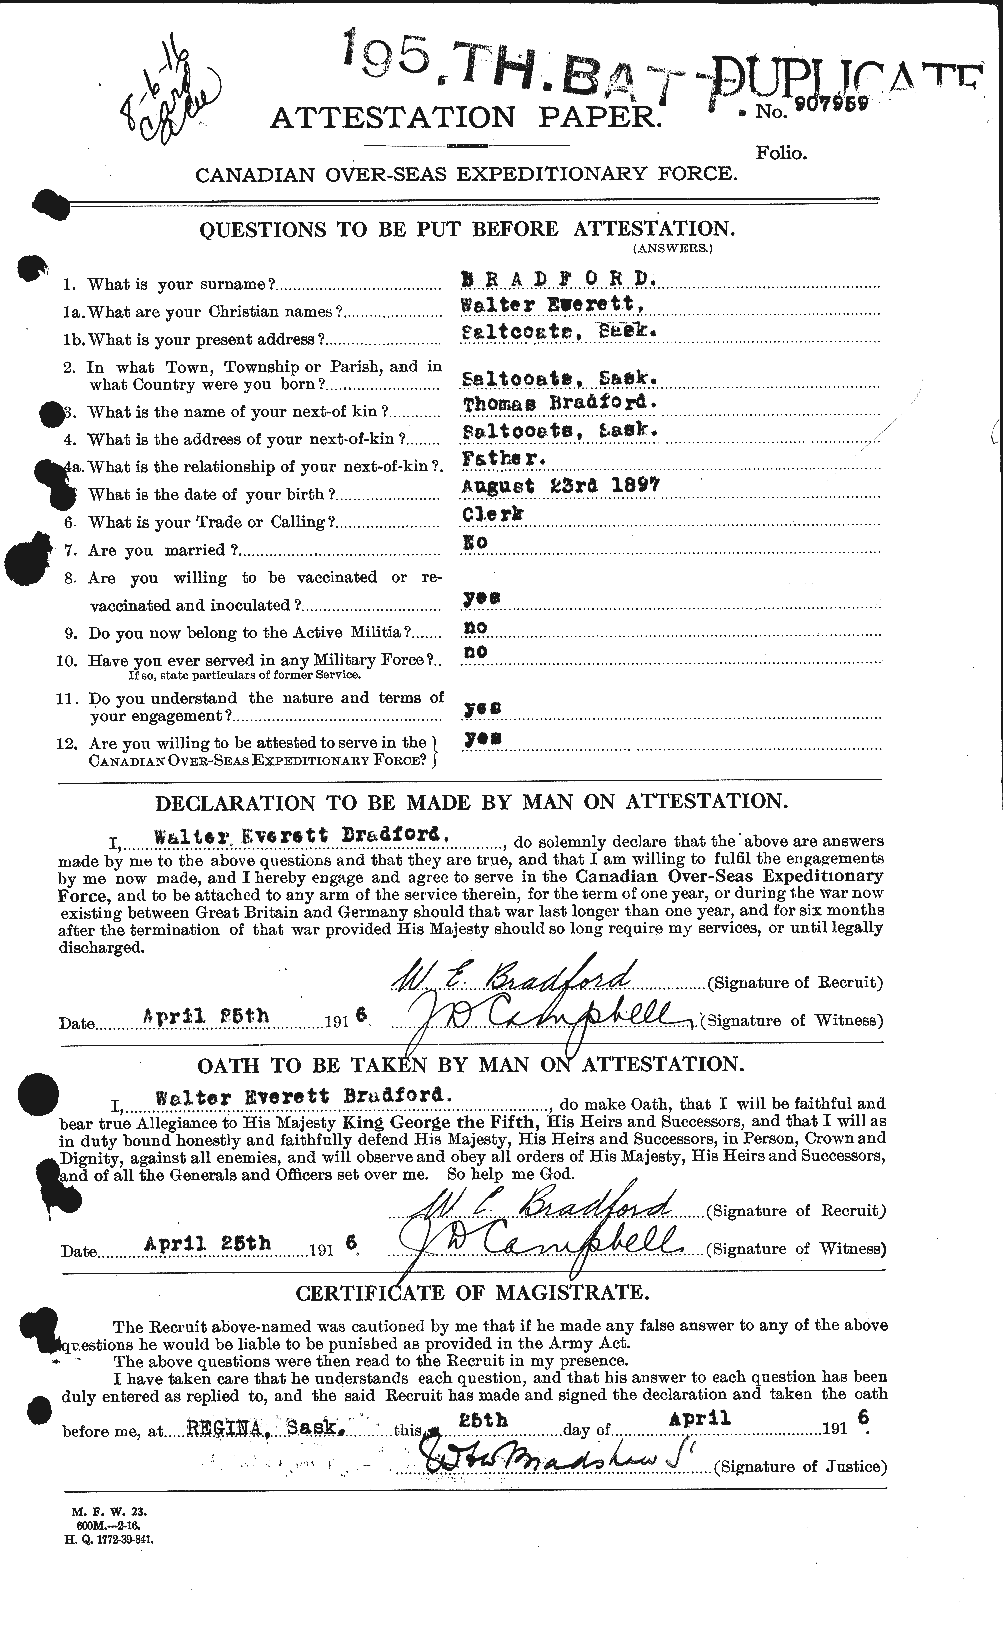 Personnel Records of the First World War - CEF 258680a